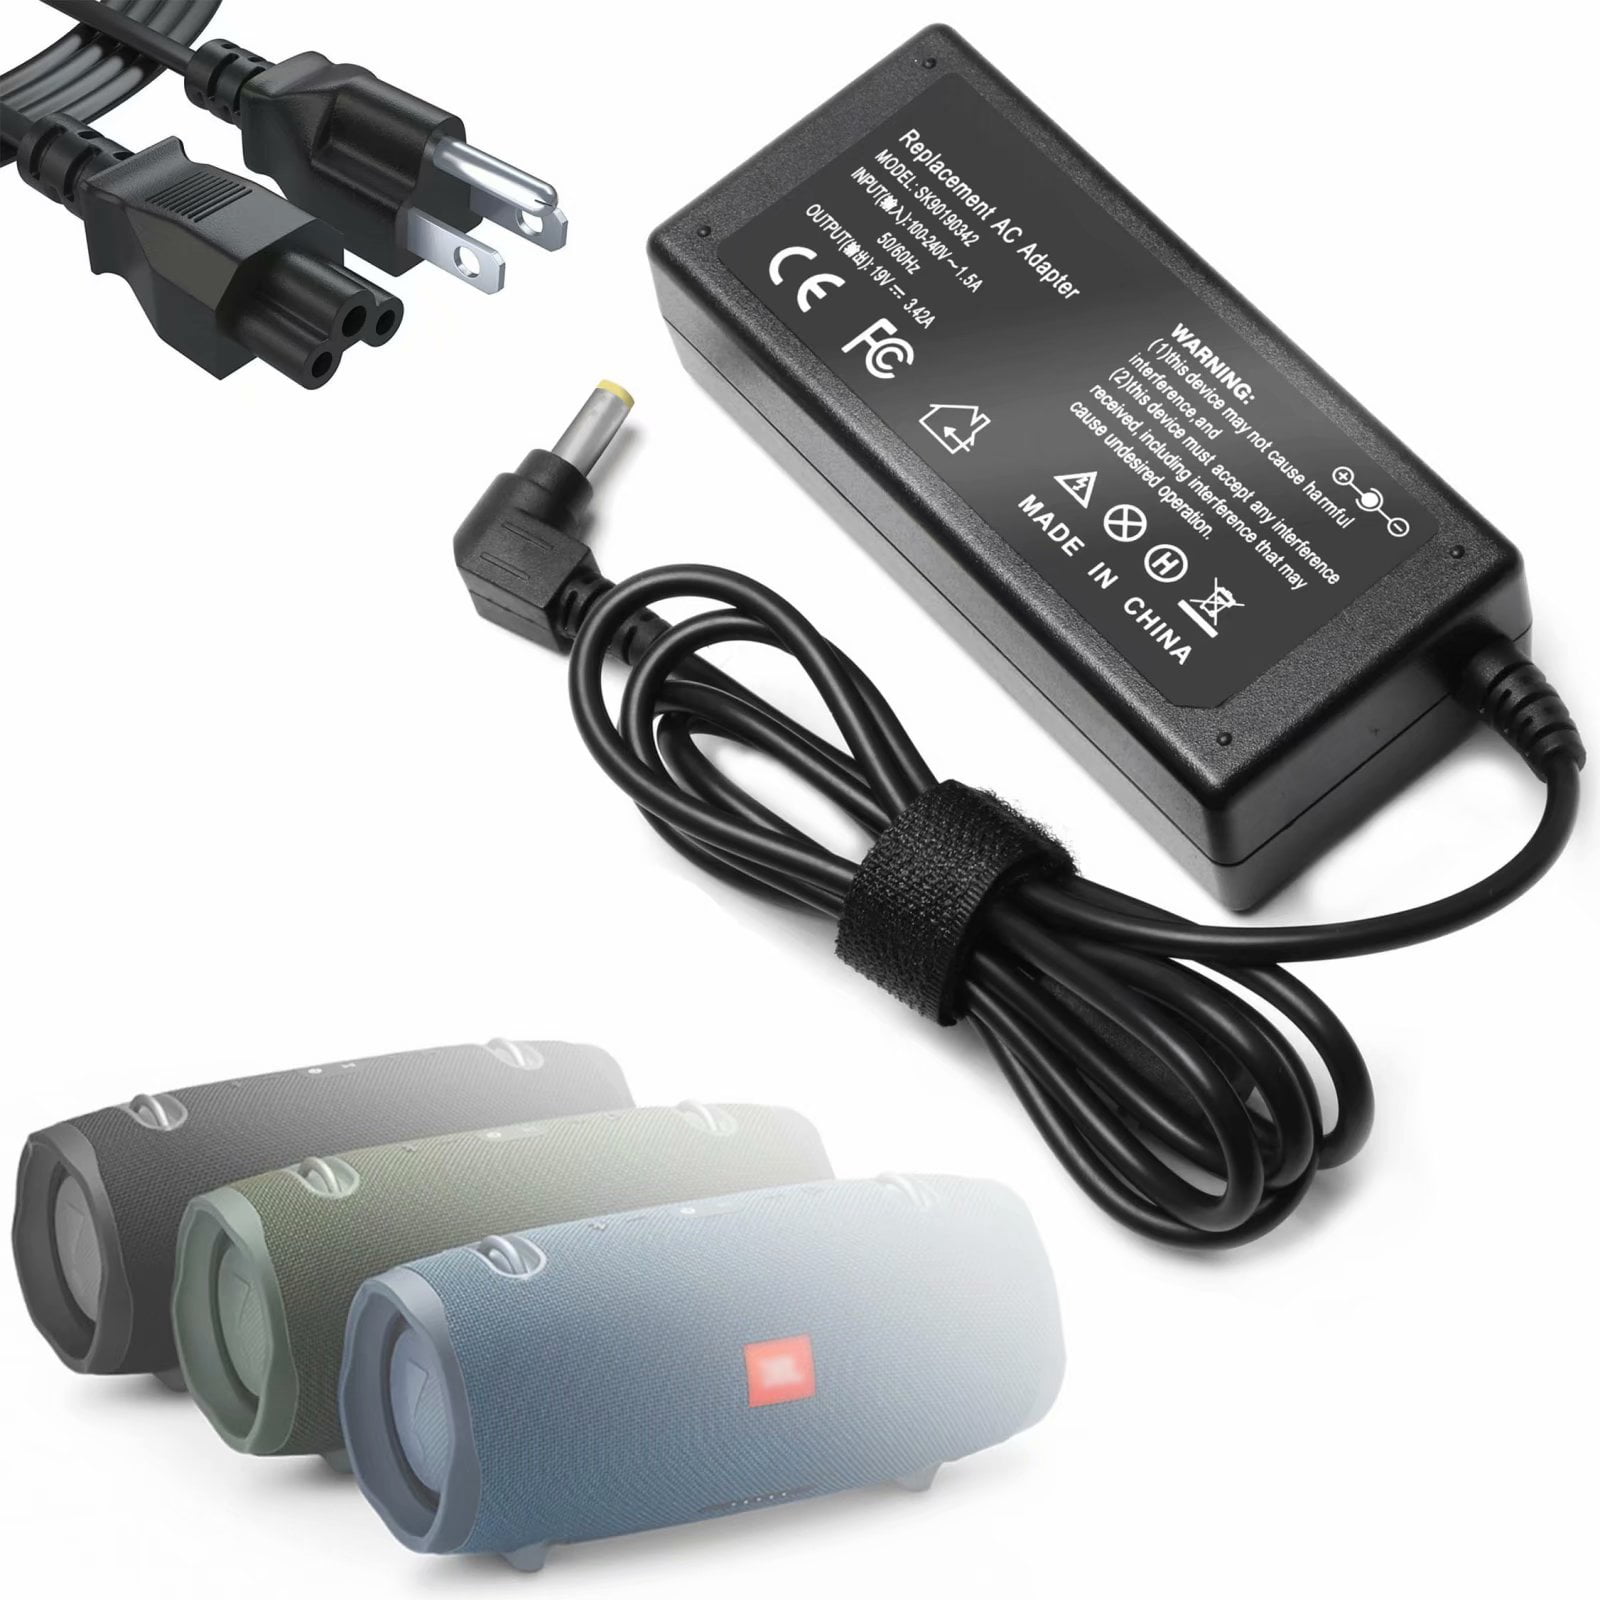 19V AC Adapter for JBL Xtreme, Xtreme 2 Portable Bluetooth Speaker Power Supply Adaptor Charger JBLXTREMEBLUUS - Walmart.com